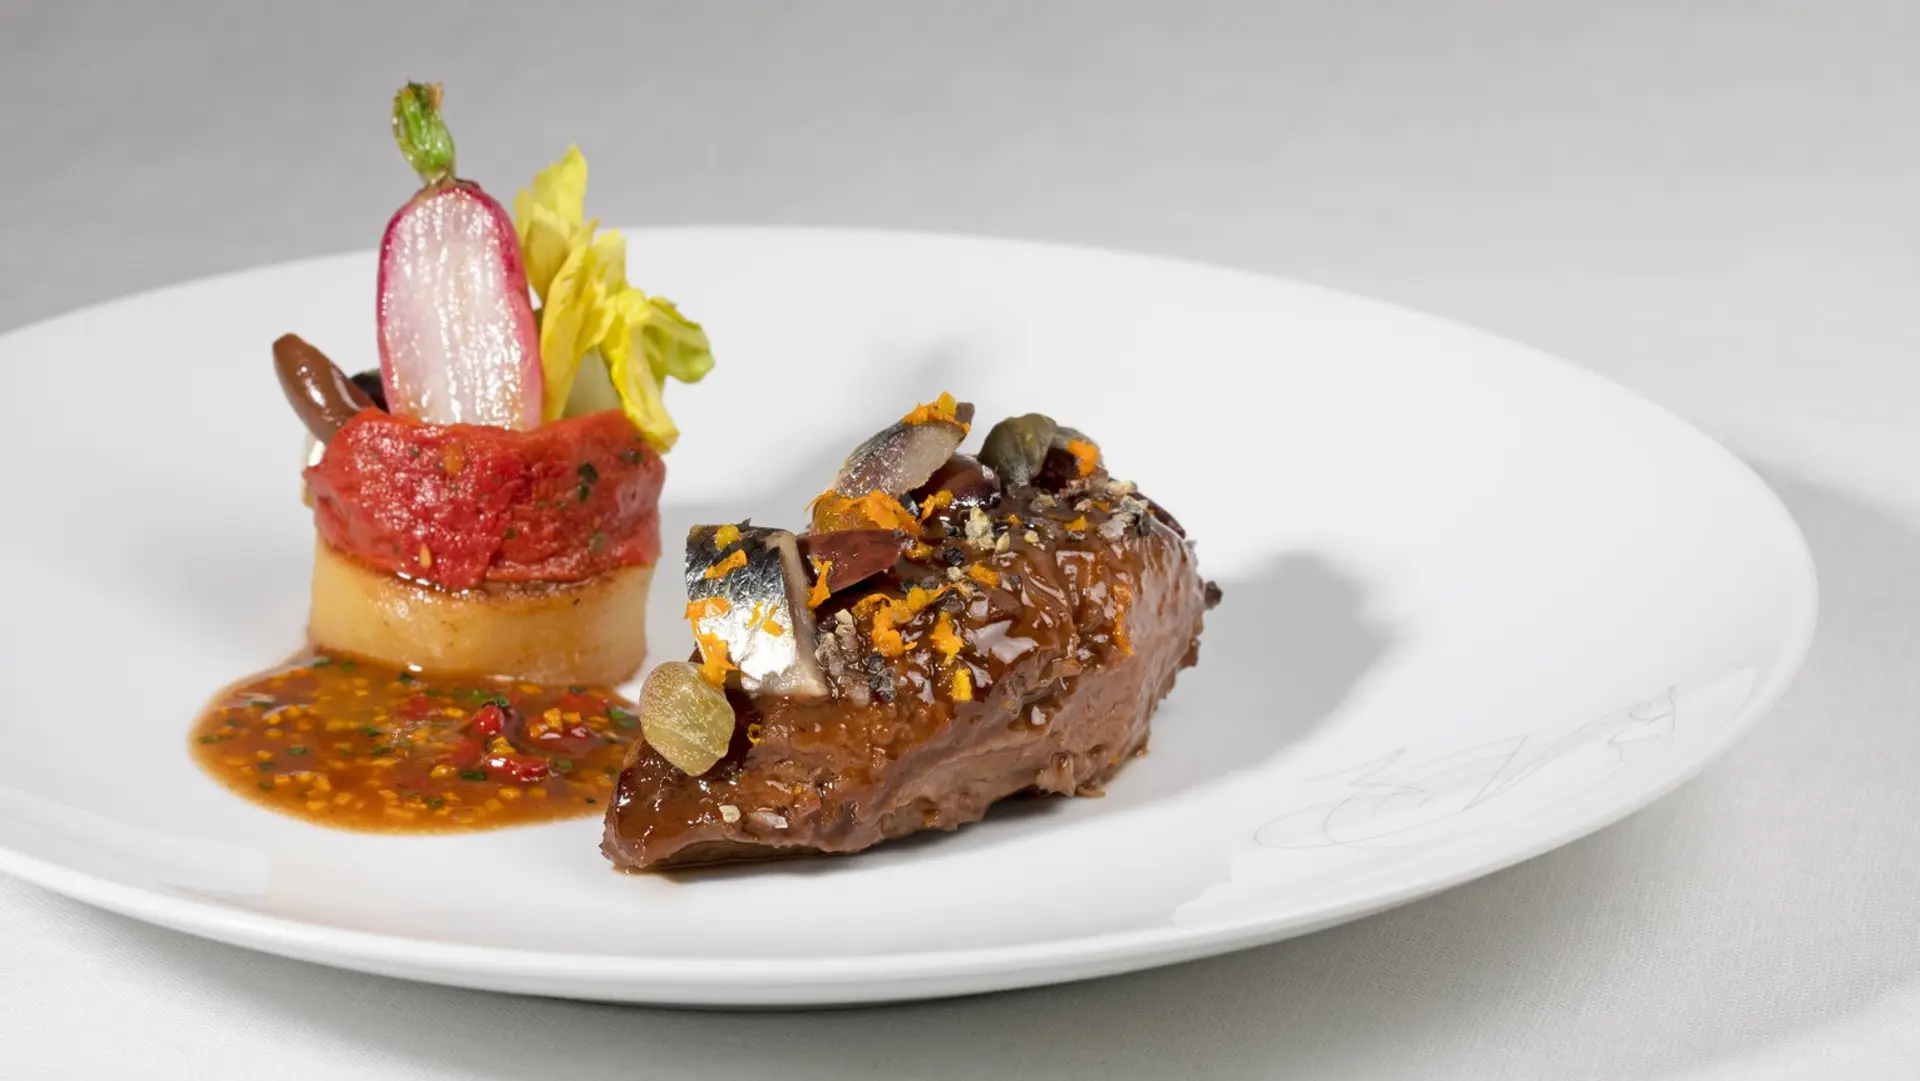 Airlines News - Air France unveils its new La Première menu from Michelin-starred chef Arnaud Donckele